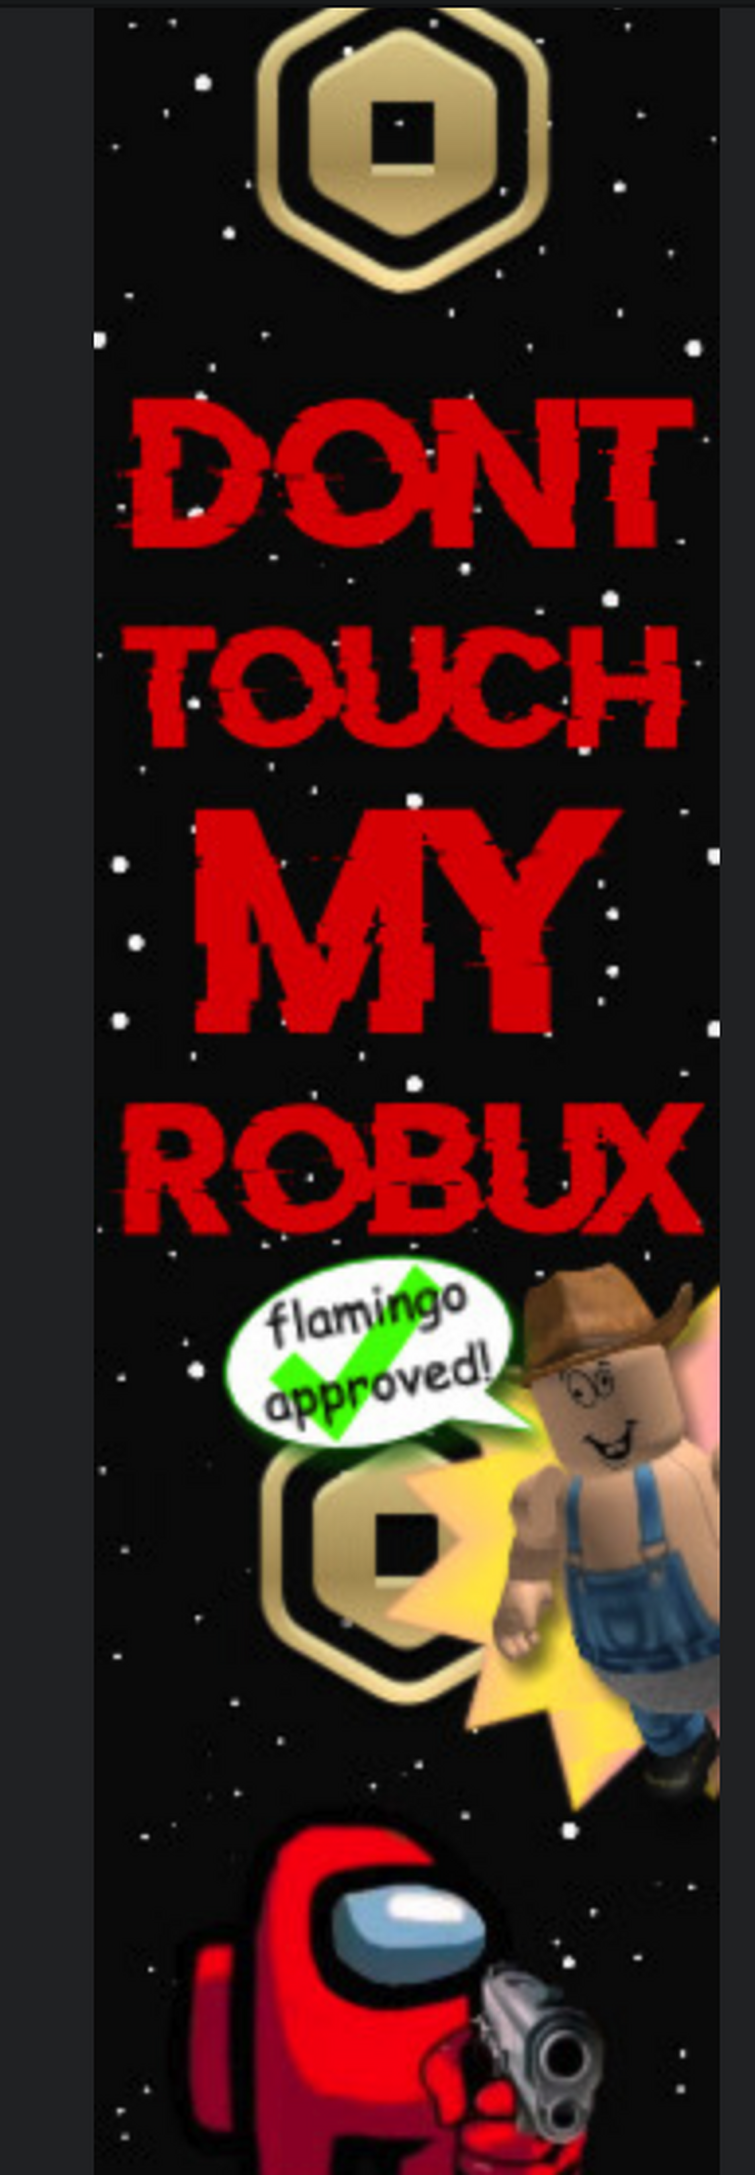 a real roblox ad